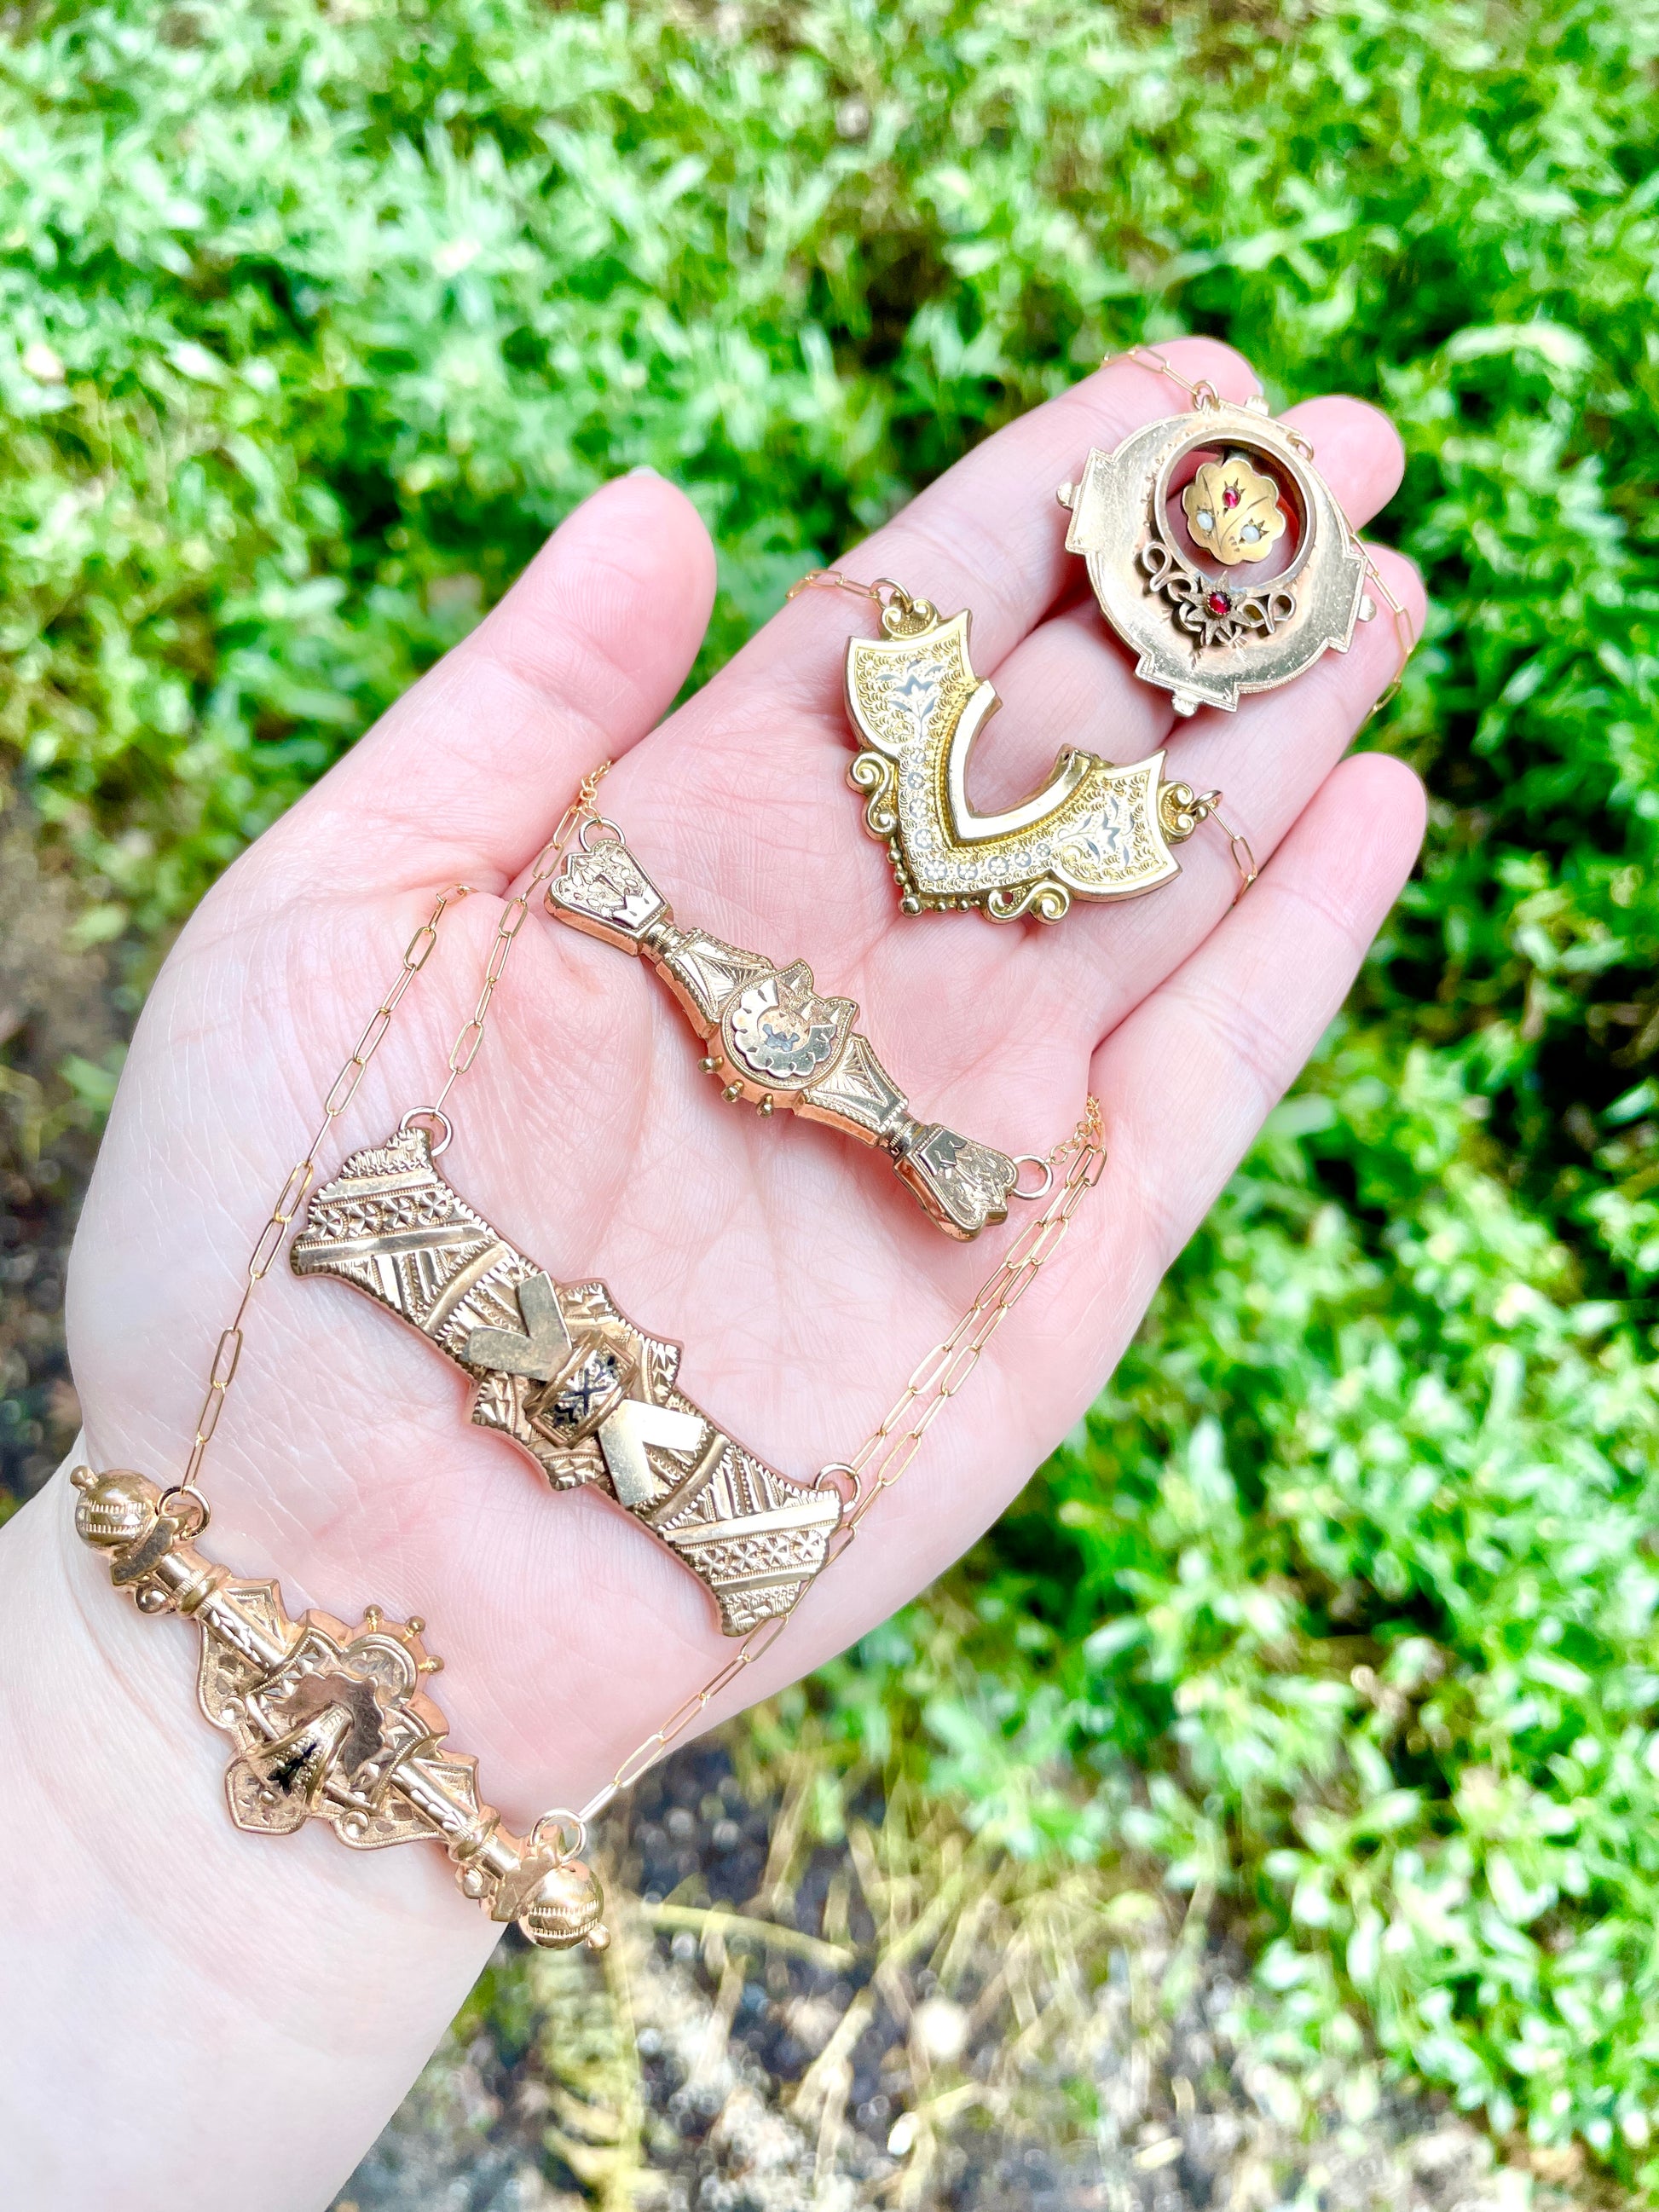 Five brooch and bar pin conversion necklaces laying on palm side of hand with green natural background